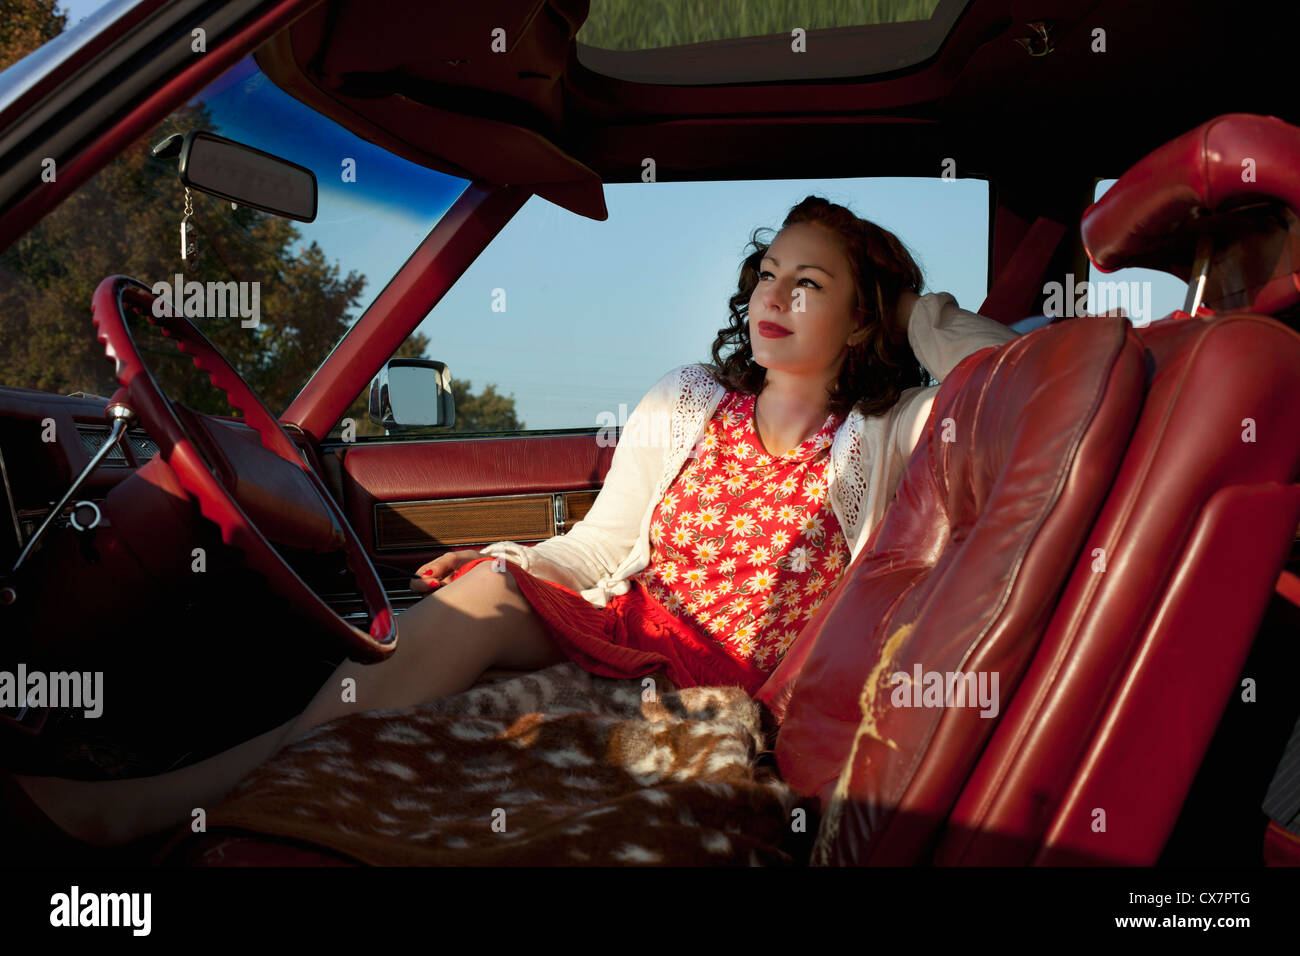 A pretty rockabilly woman sitting in the front seat of a vintage car Stock Photo